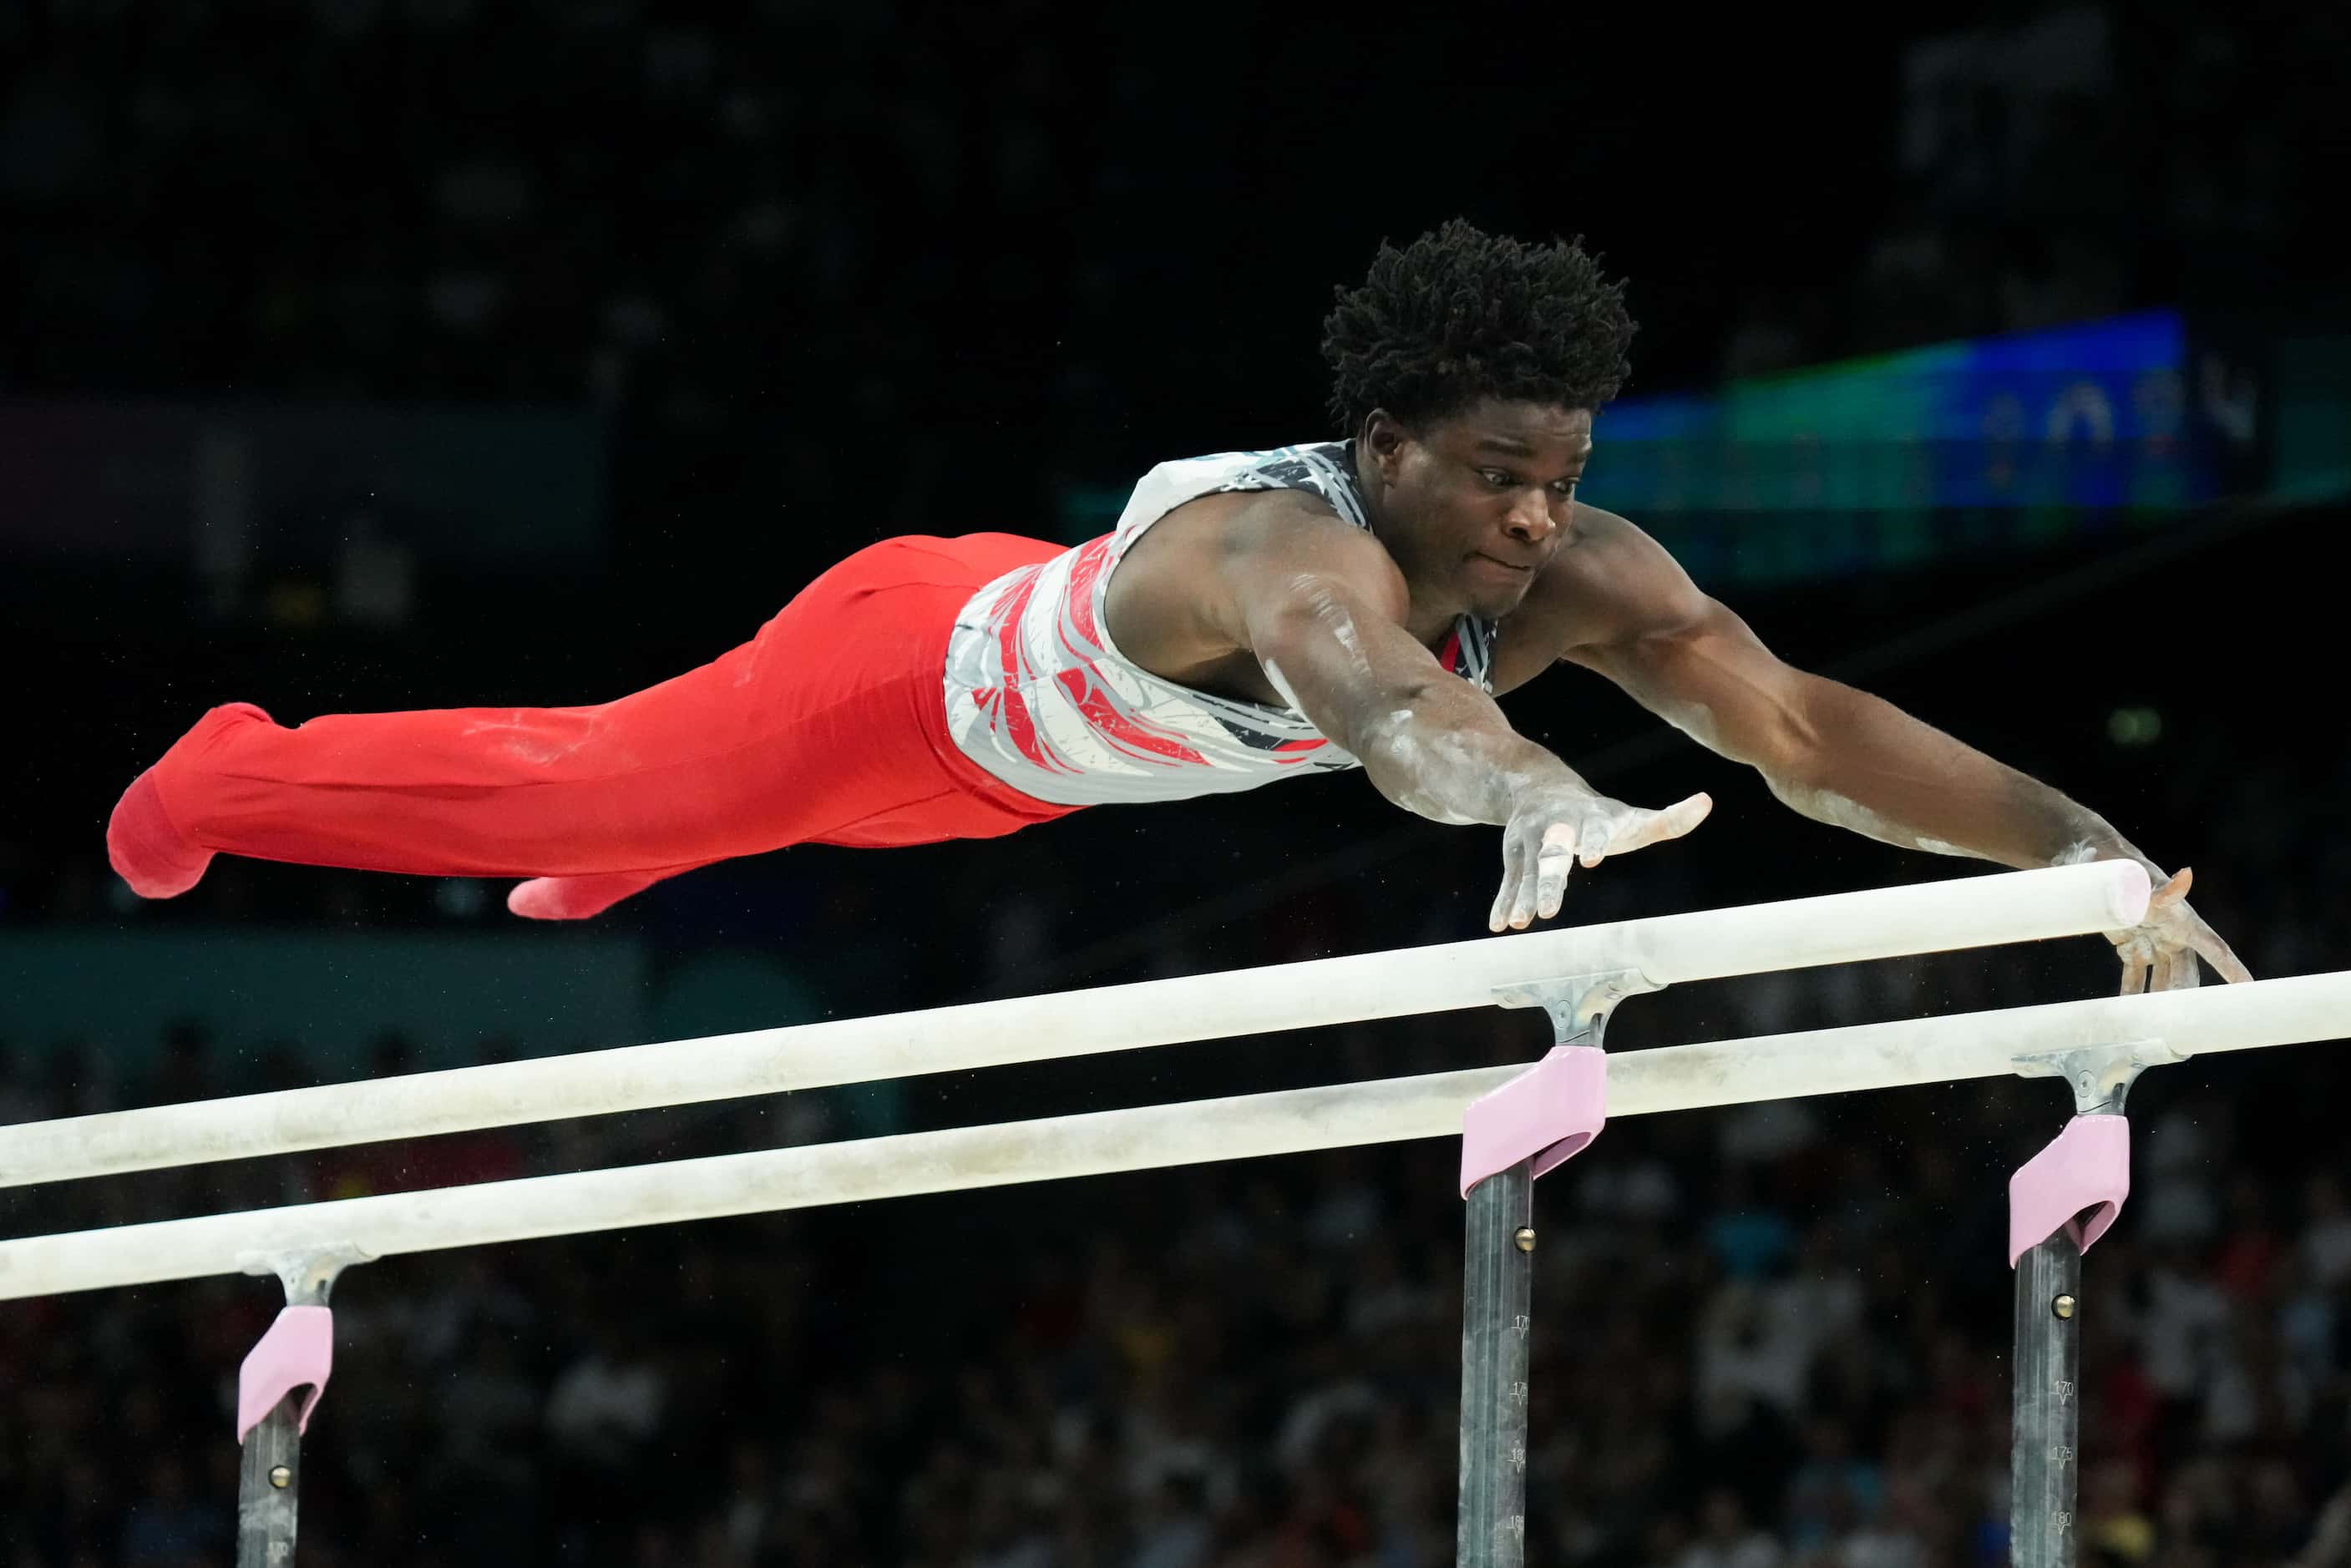 Frederick Richard of the United States competes on the parallel bars during the men’s...